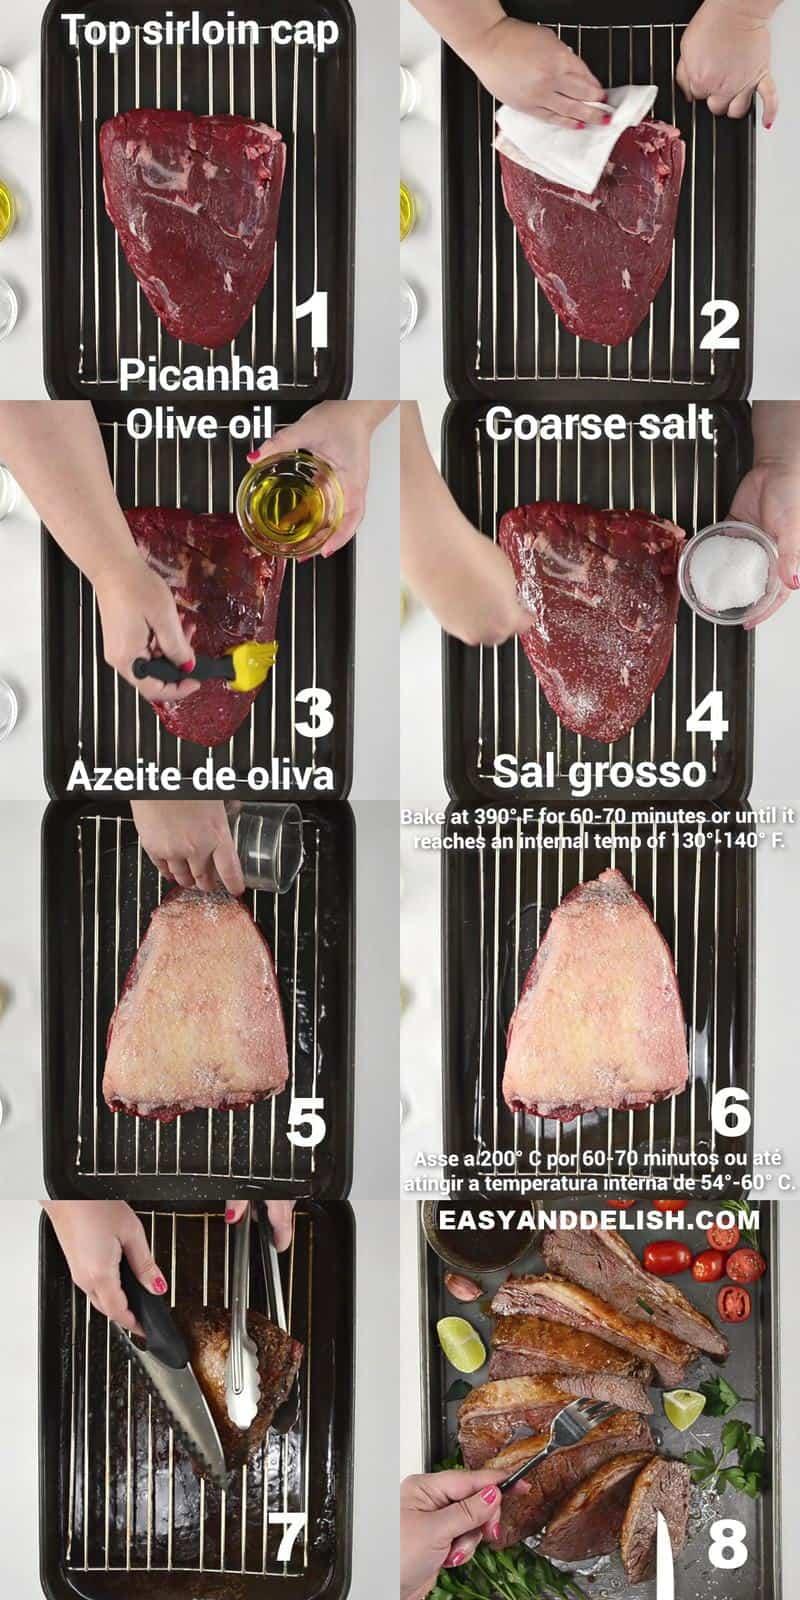 image collage showing how to amke picanha roast in 8 steps